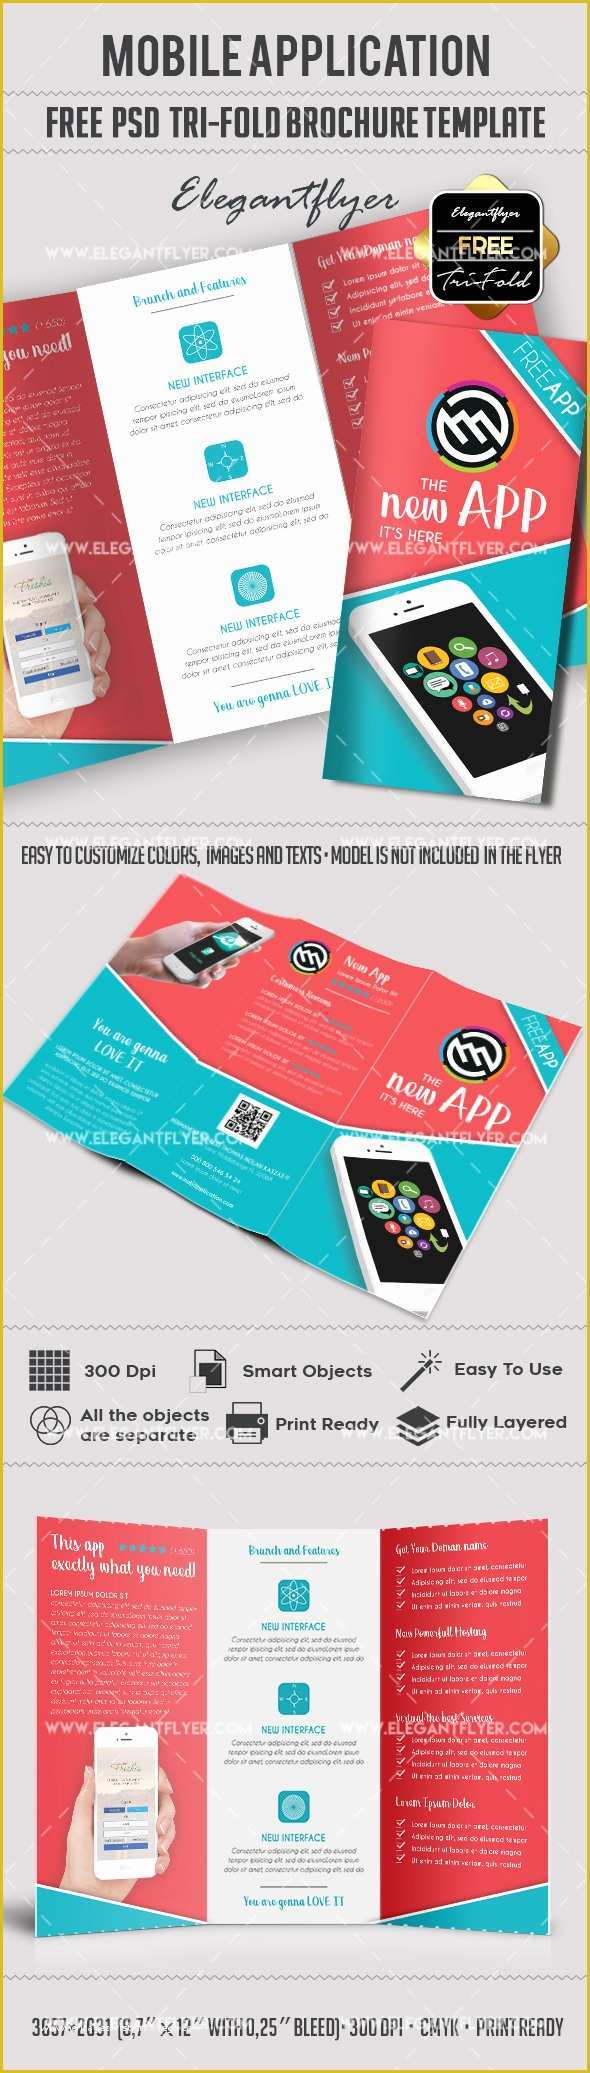 Free Flyer Design Templates App Of Free Mobile Application Tri Fold Psd Brochure – by